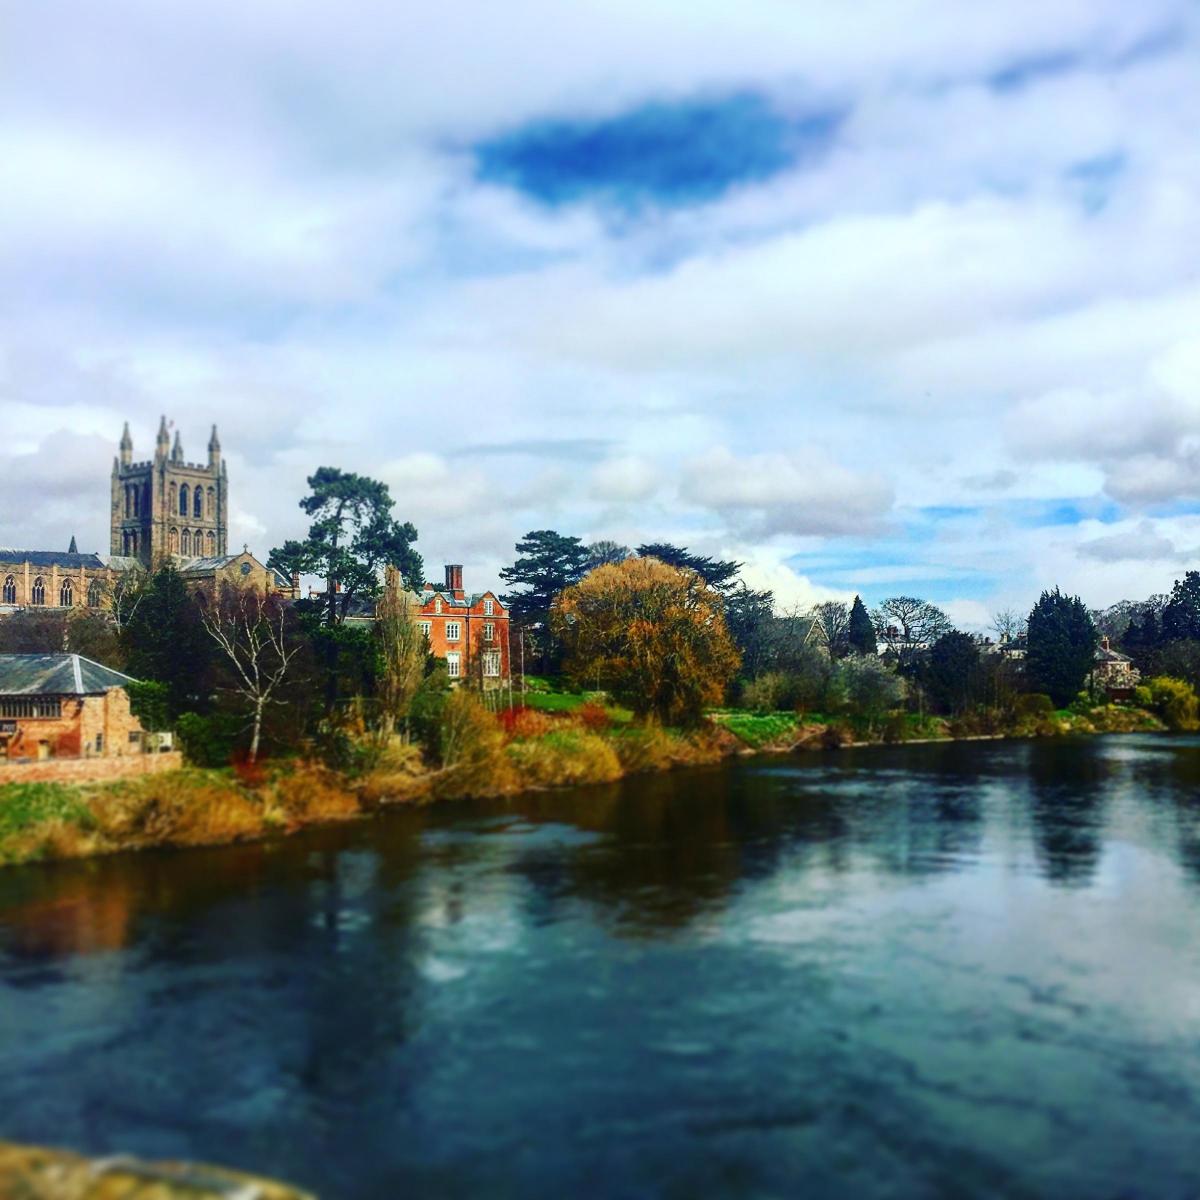 Cat Hartland took this photo while on a recent visit to Hereford, her home town.